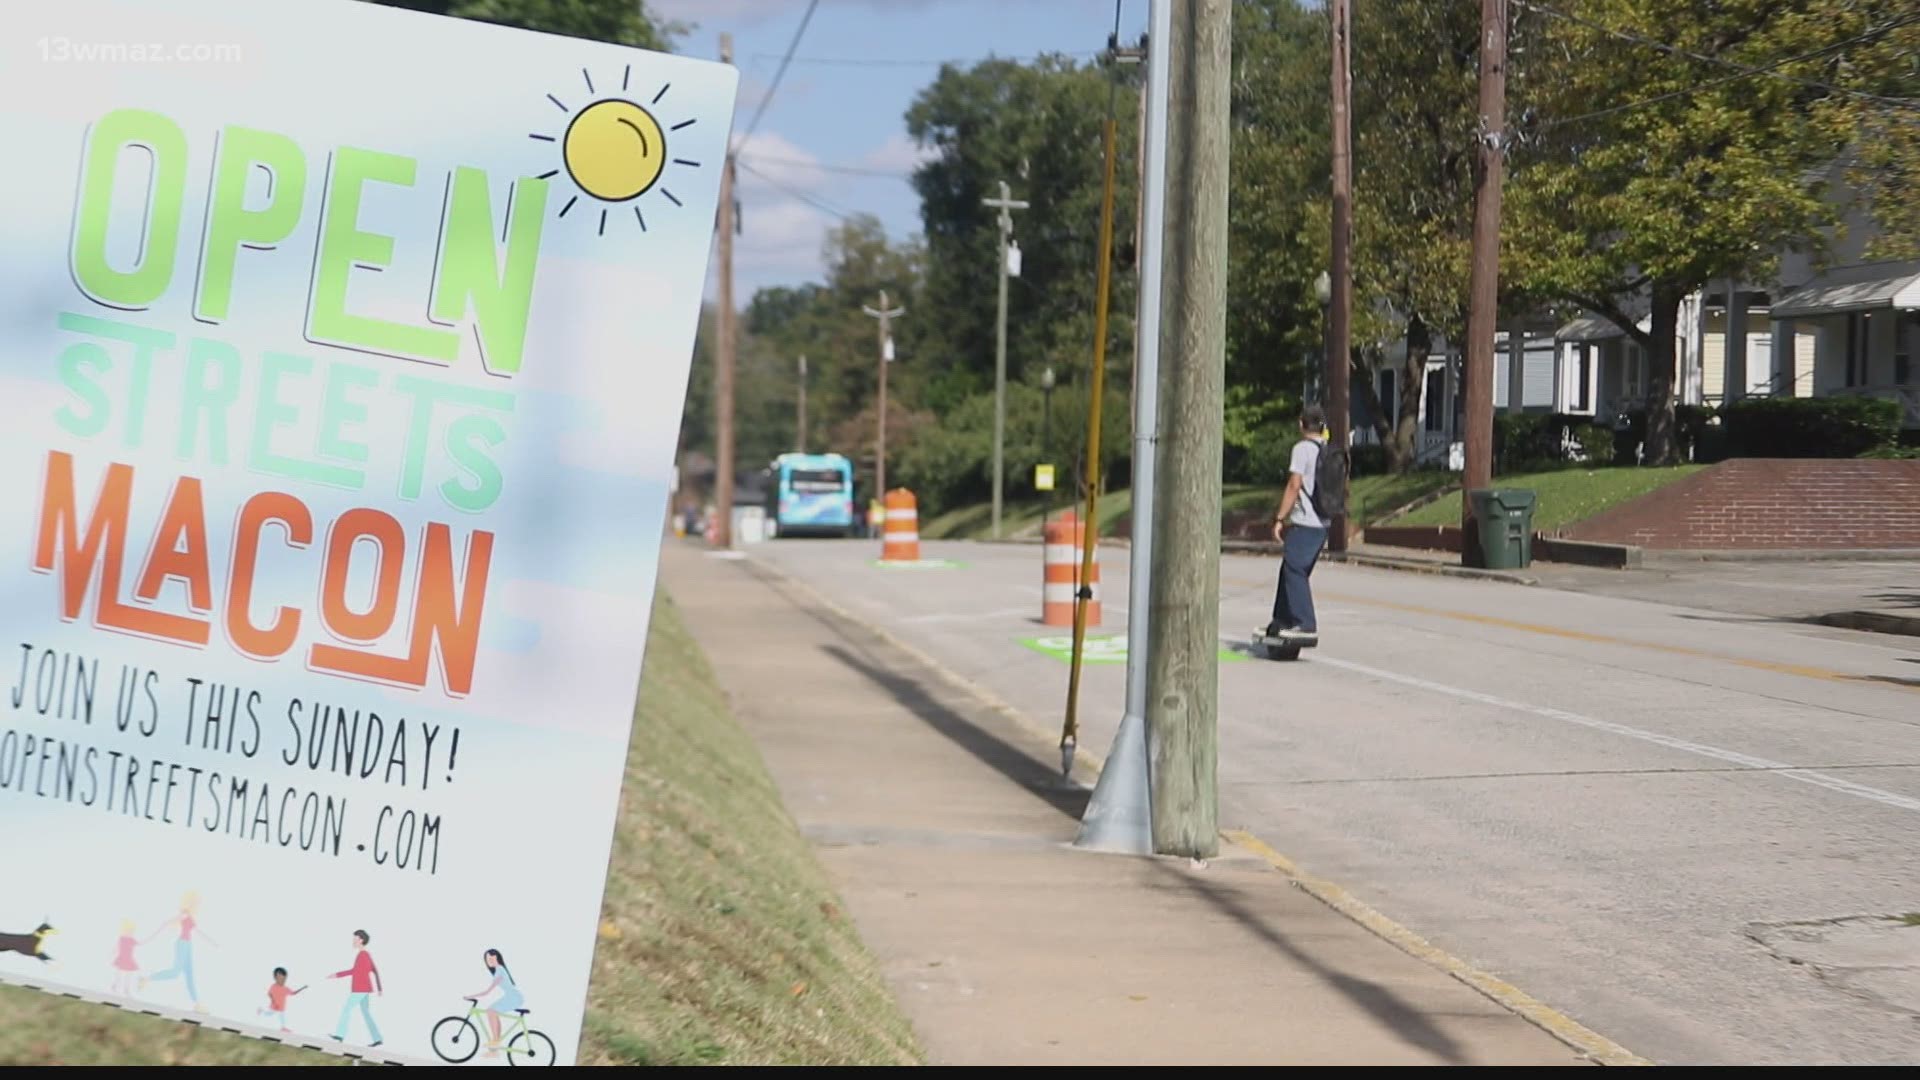 The neighborhood activation project shut off Tattnall and Monroe Streets to cars allowing the community members to get out and enjoy the space.